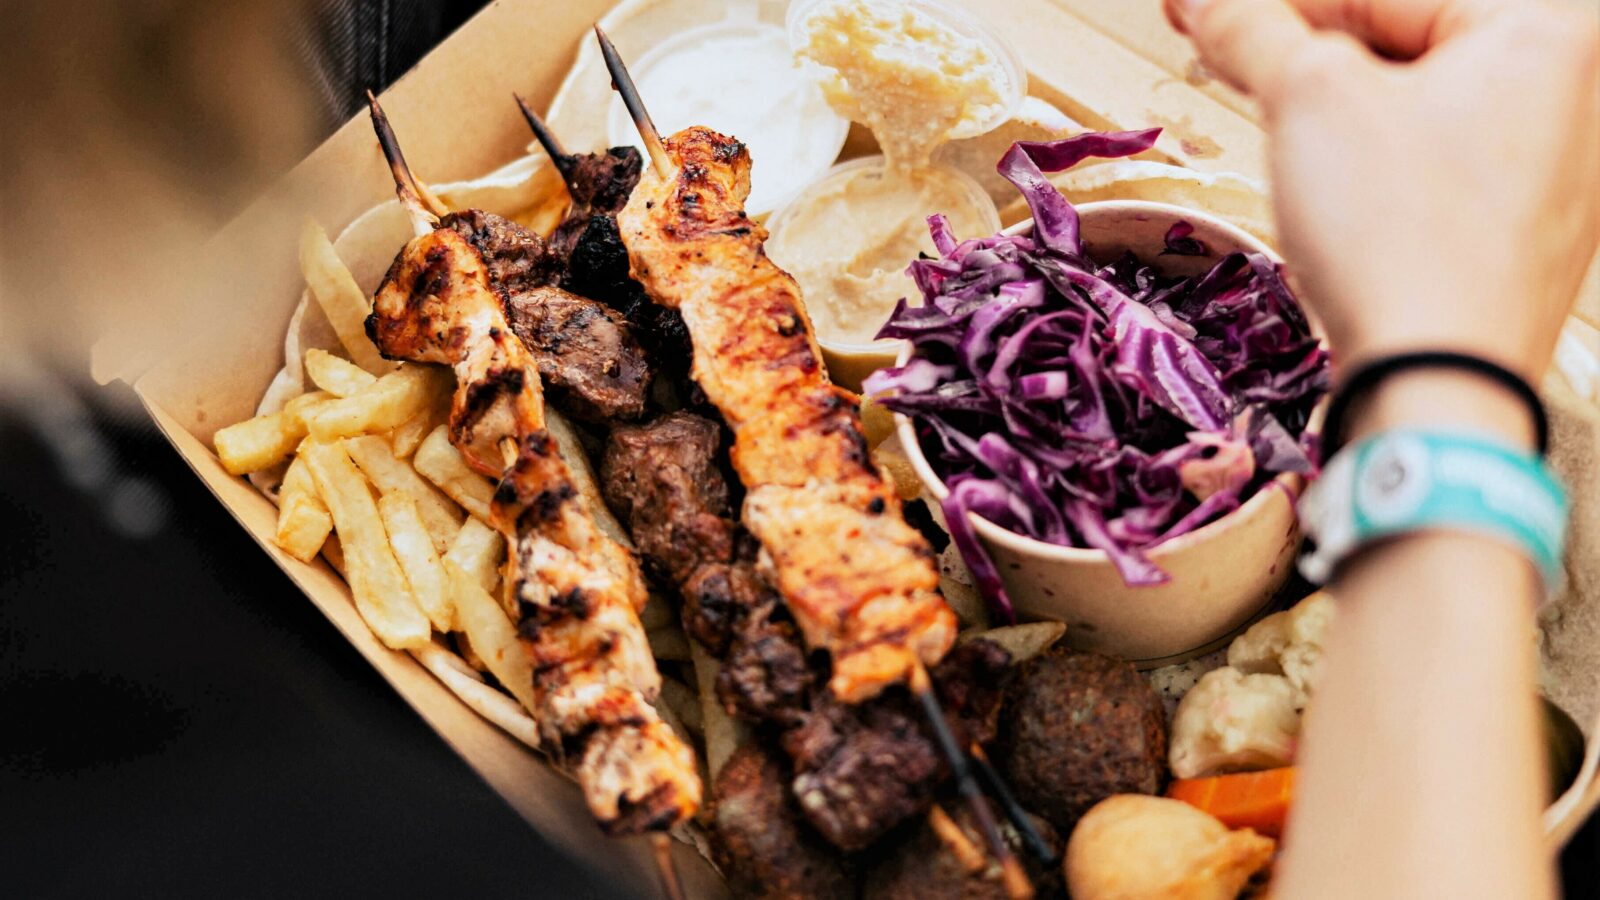 The Habibiz grilled meat plate